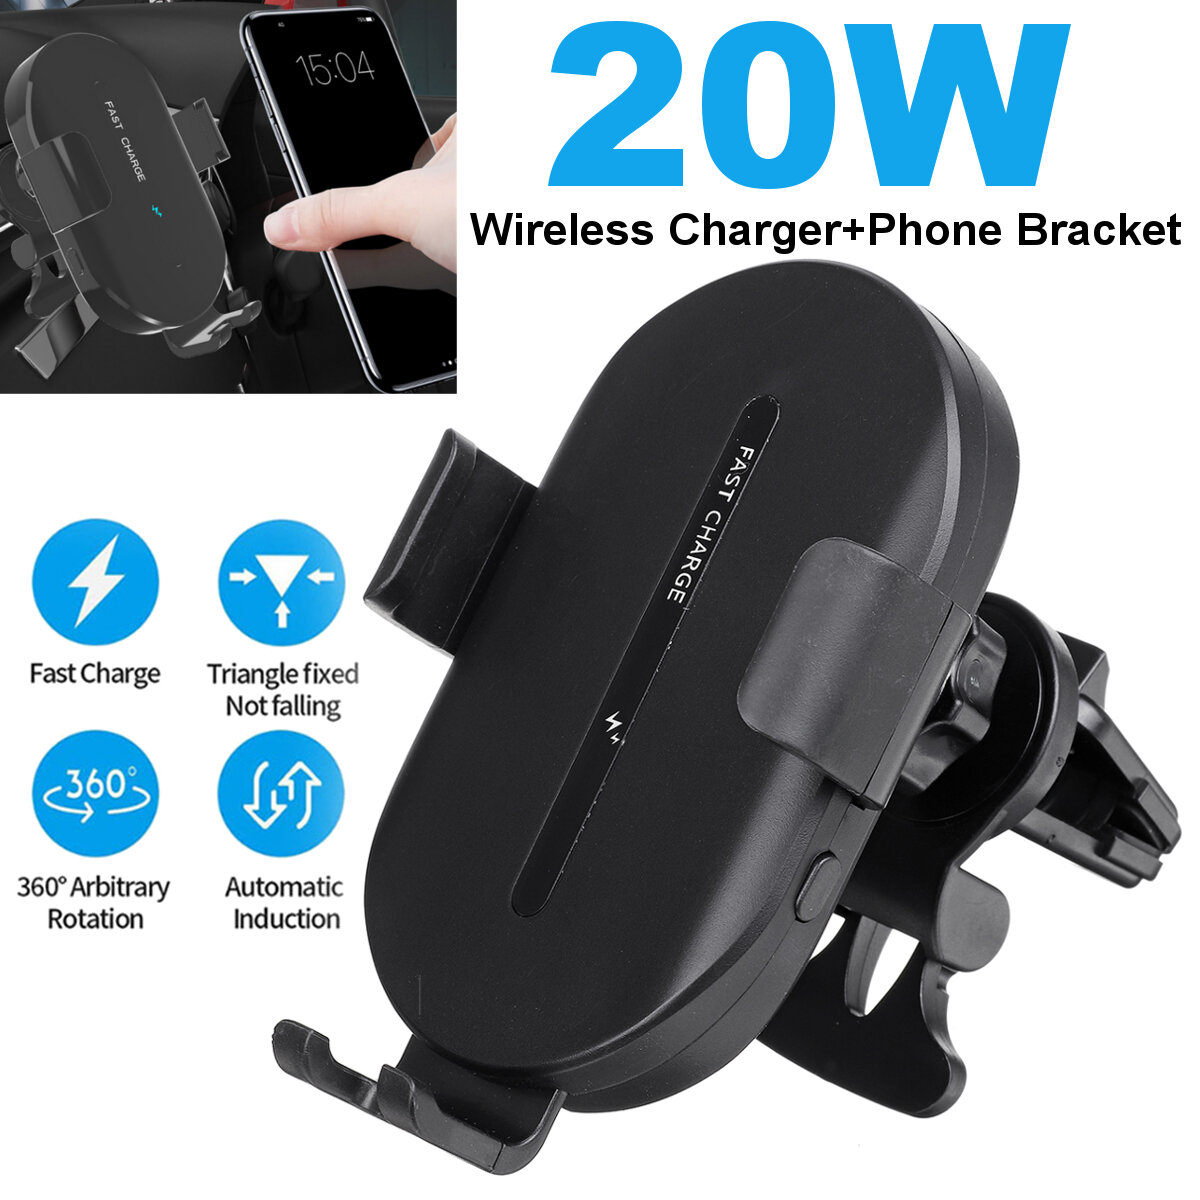 

Universal 360° Rotation 20W Car Air Outlet Qi Wireless Fast Charging Charger Mobile Phone Bracket Holder Stand